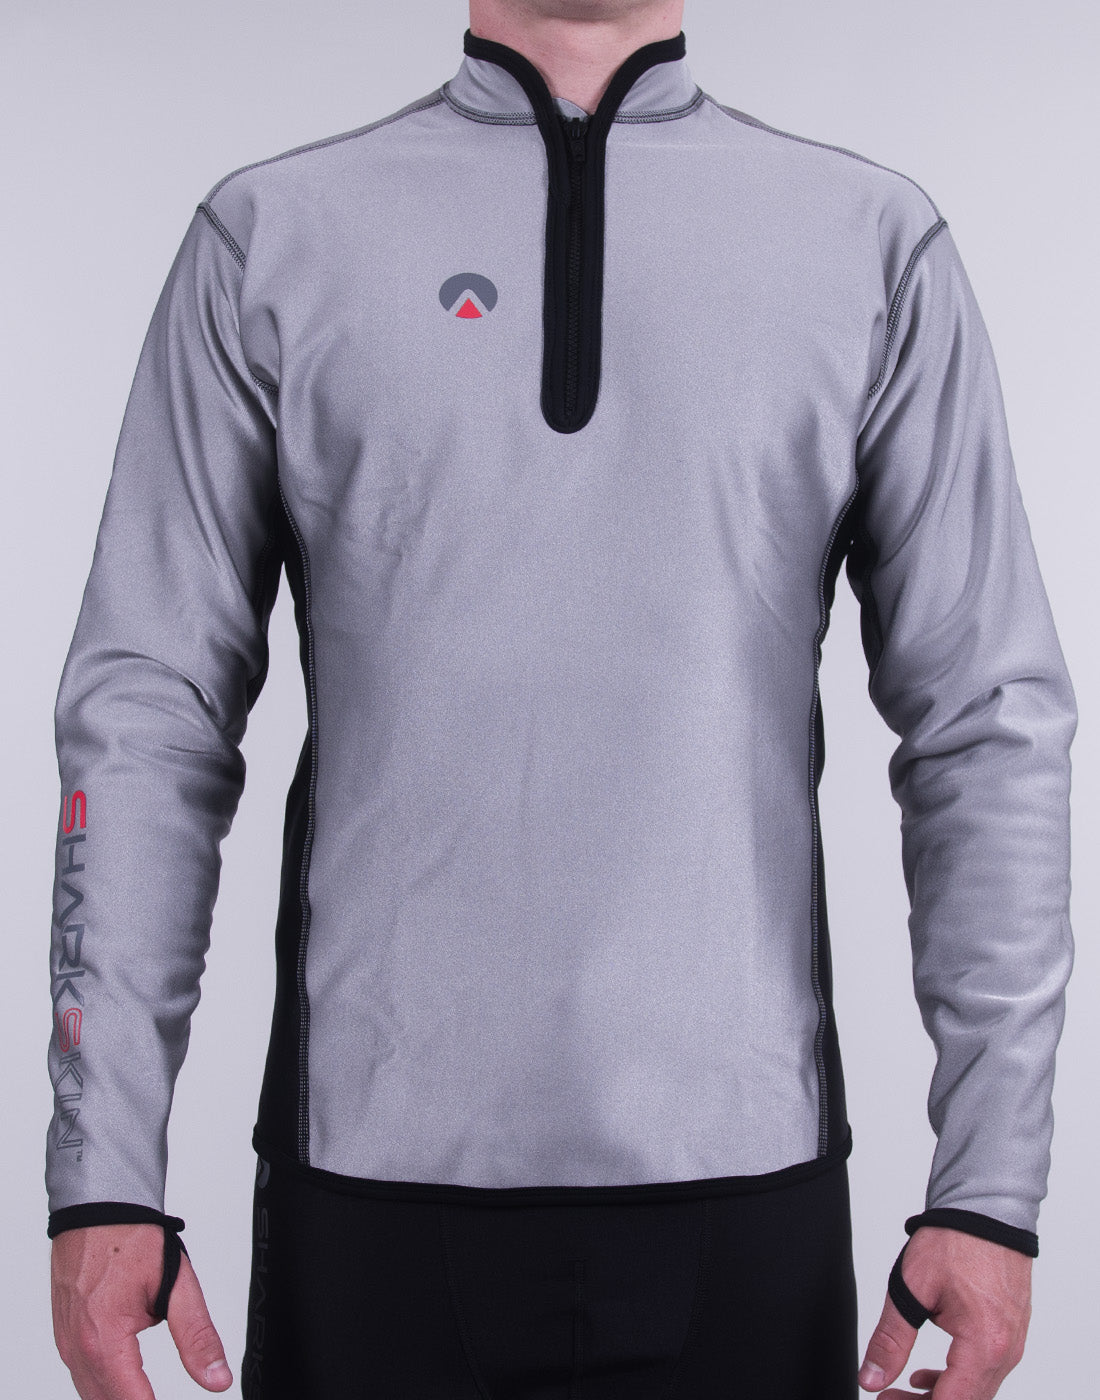 Chillproof Long Sleeve Chest Zip - Male